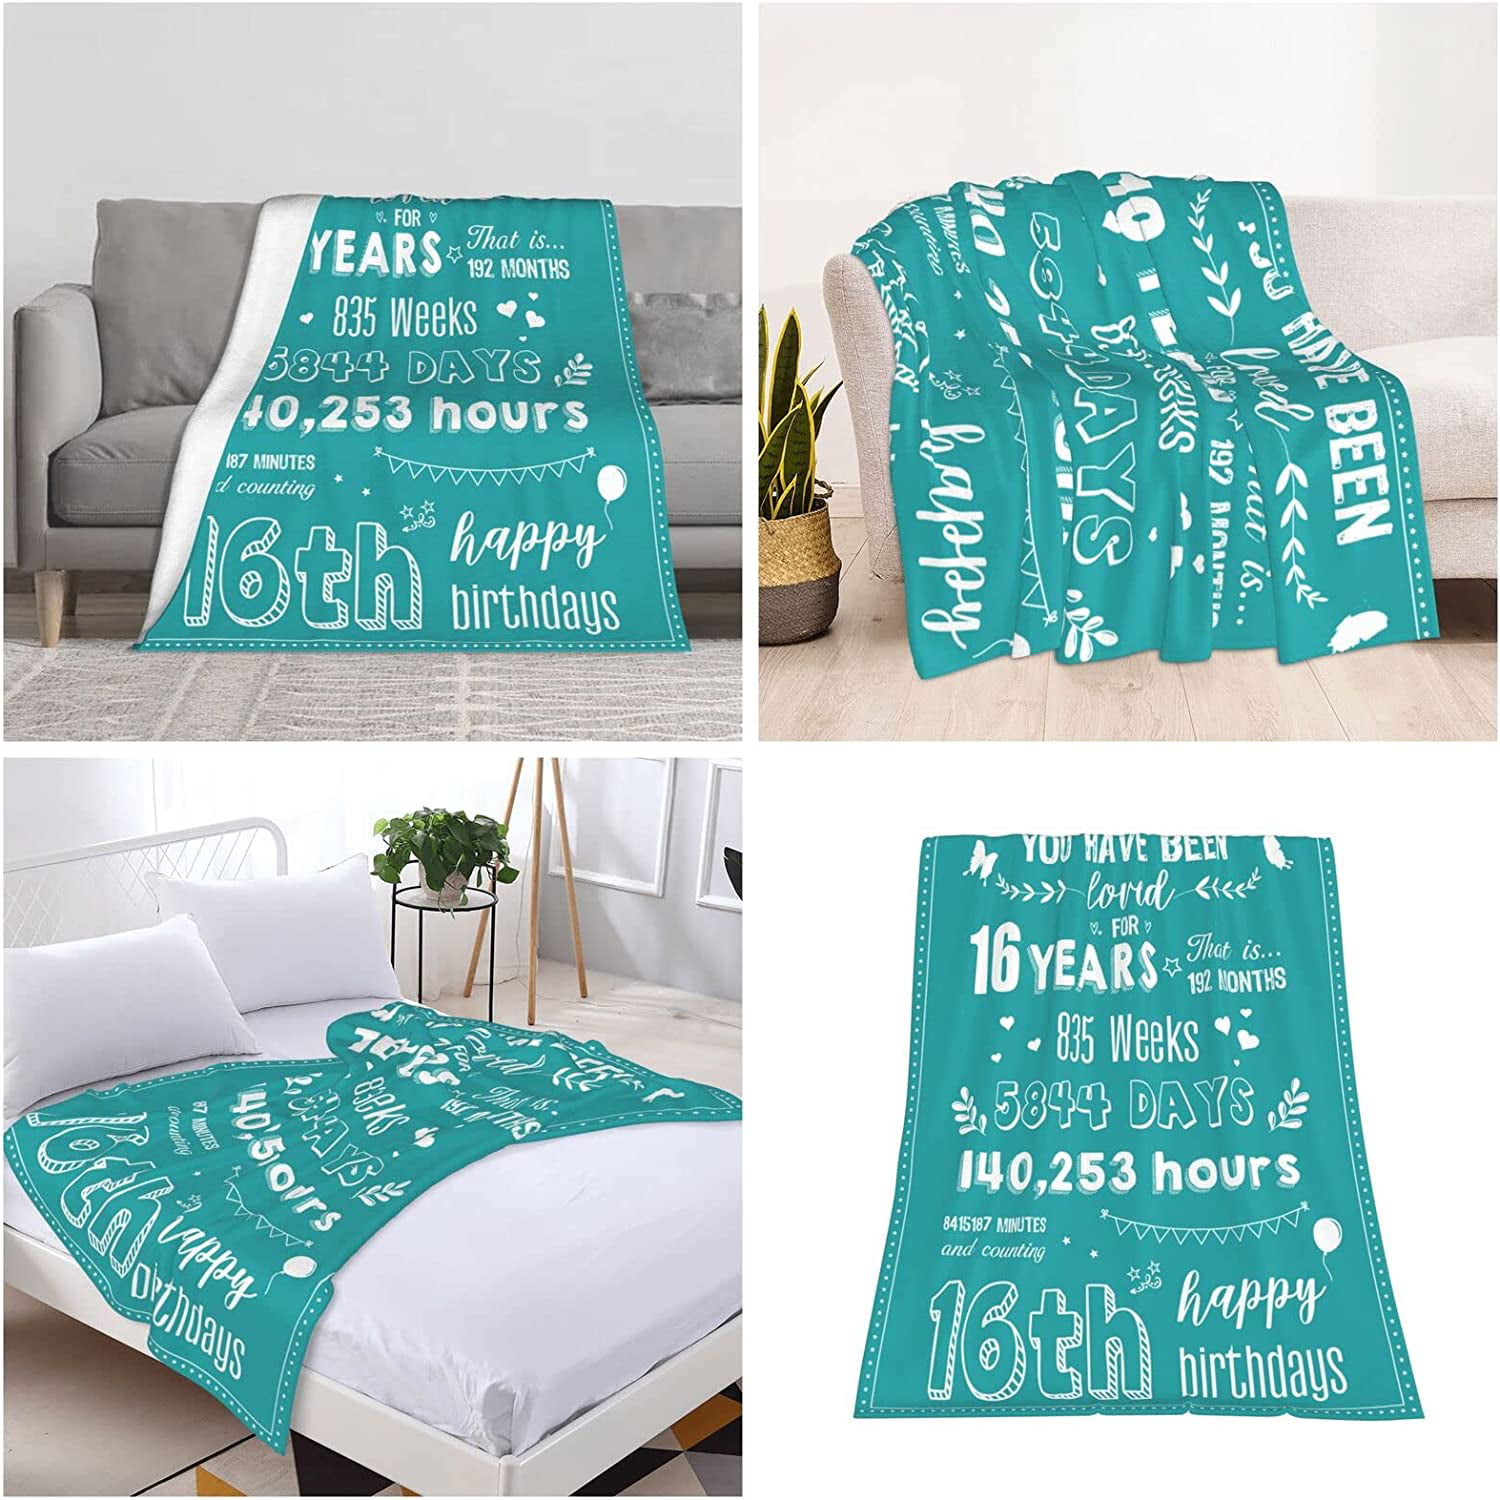 13 Year Old Girl Gift Ideas Blanket 60X50 - Gifts for 13 Year Old Girl -  13th Birthday Gifts for Girls - 13 Year Old Girl Birthday Gifts - Teen Girl  Gifts